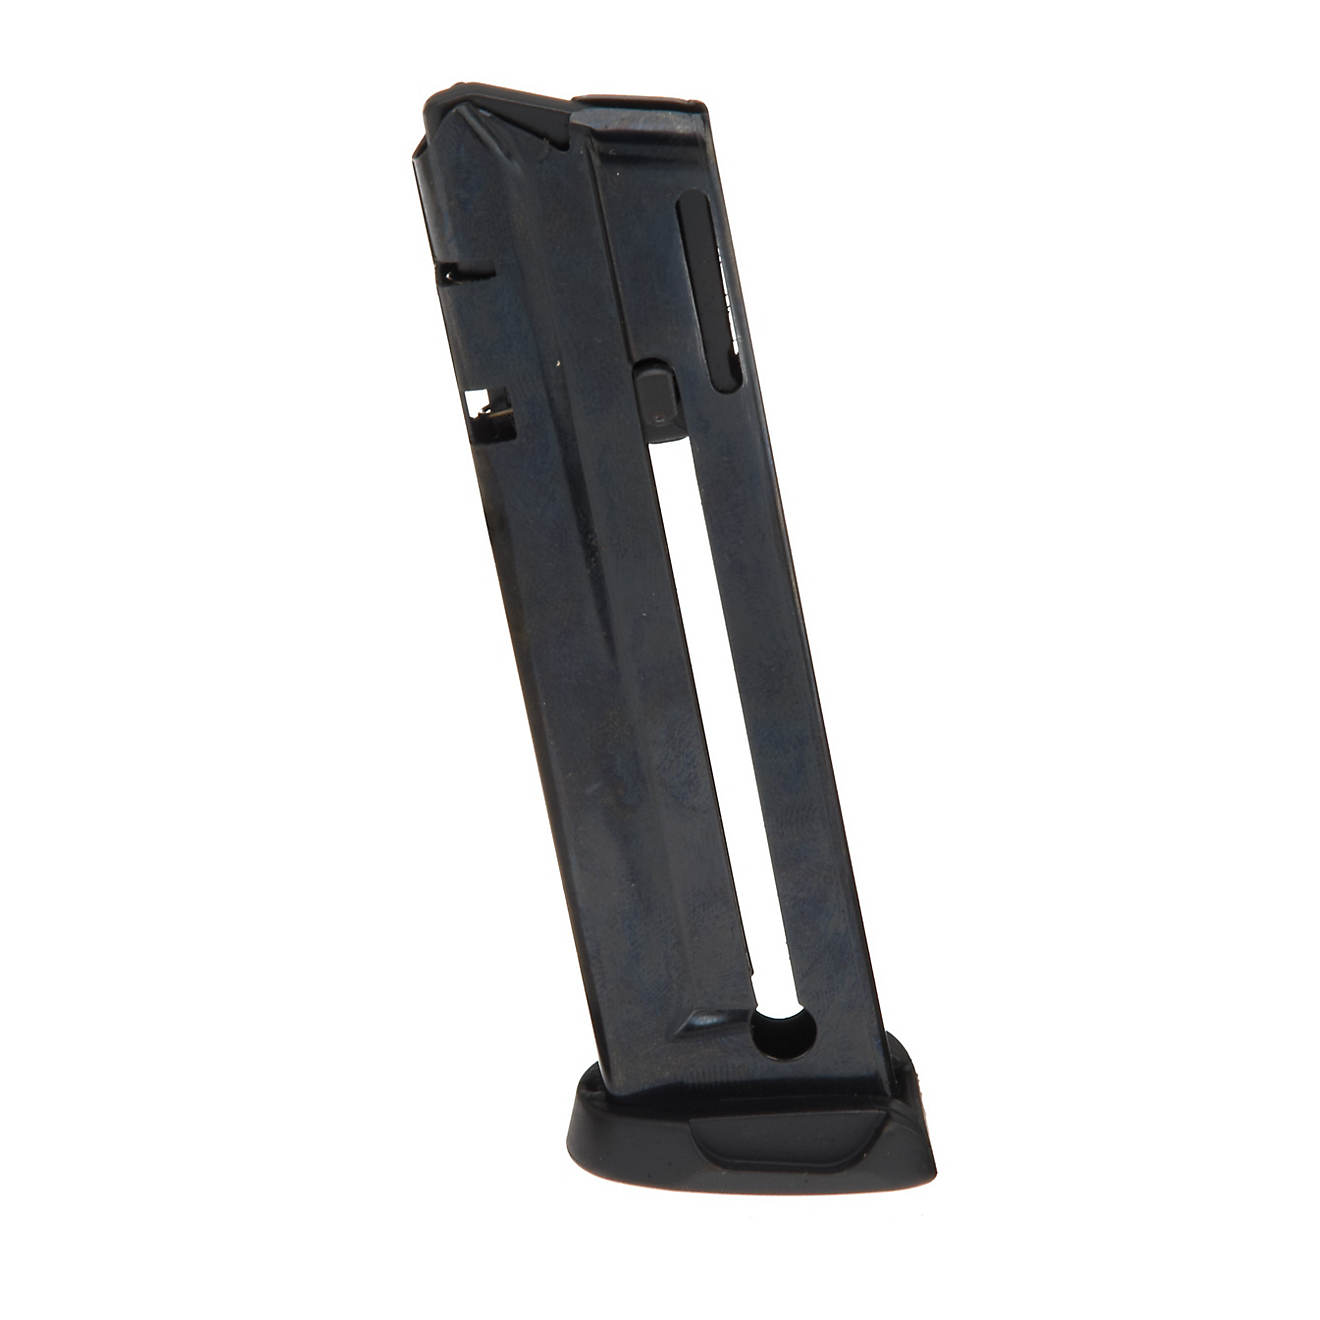 Ruger 90382 SR22 Long Rifle 10 Rounds Magazines 2 Pieces for sale online